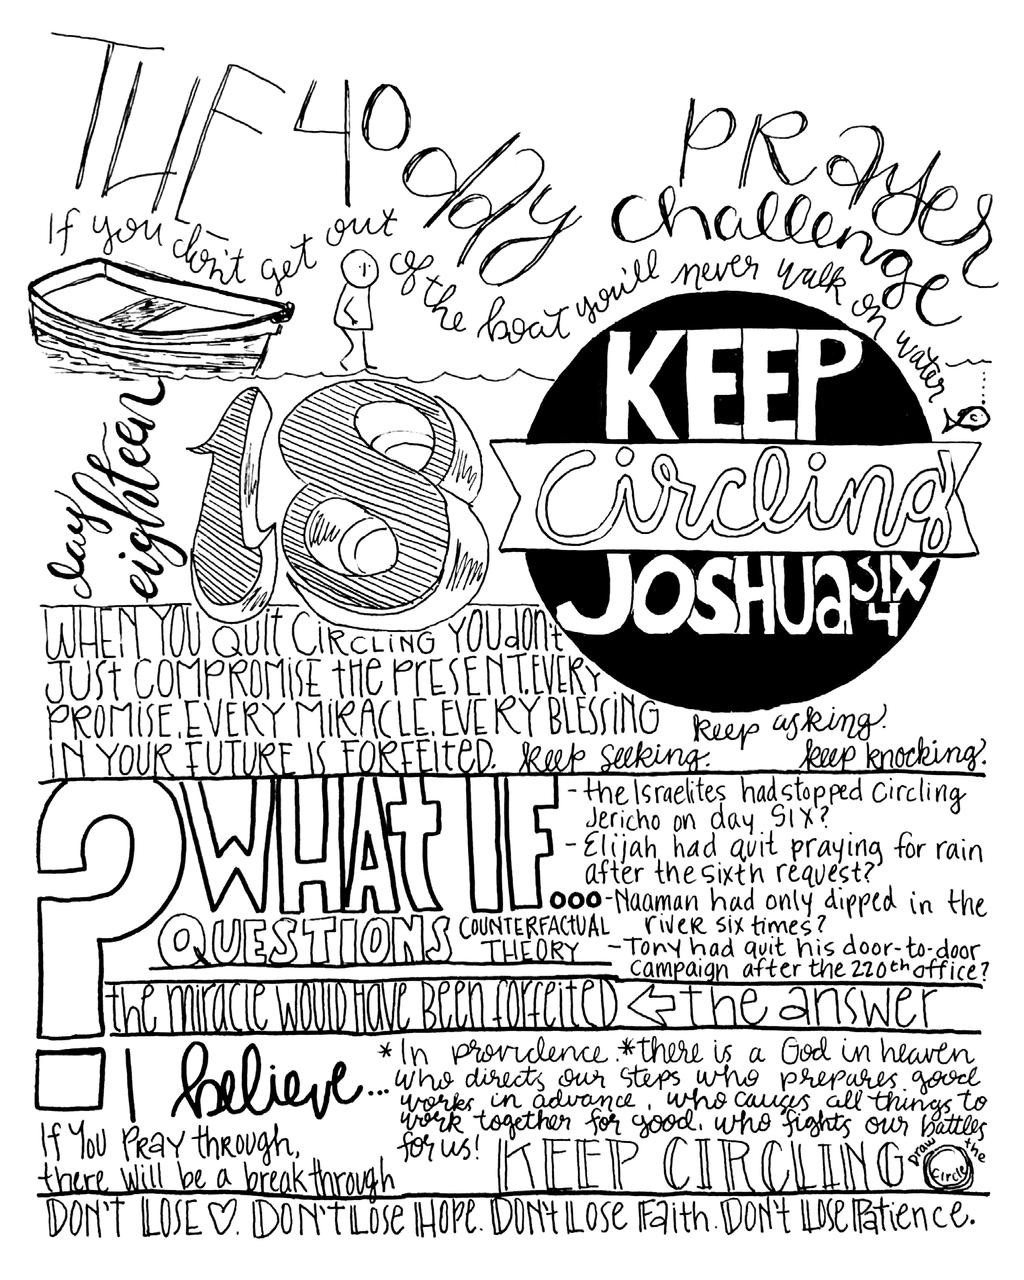 Day eighteen: August 17 JOSHUA 6:7 On the seventh day march around the city seven times. Keep Circling!